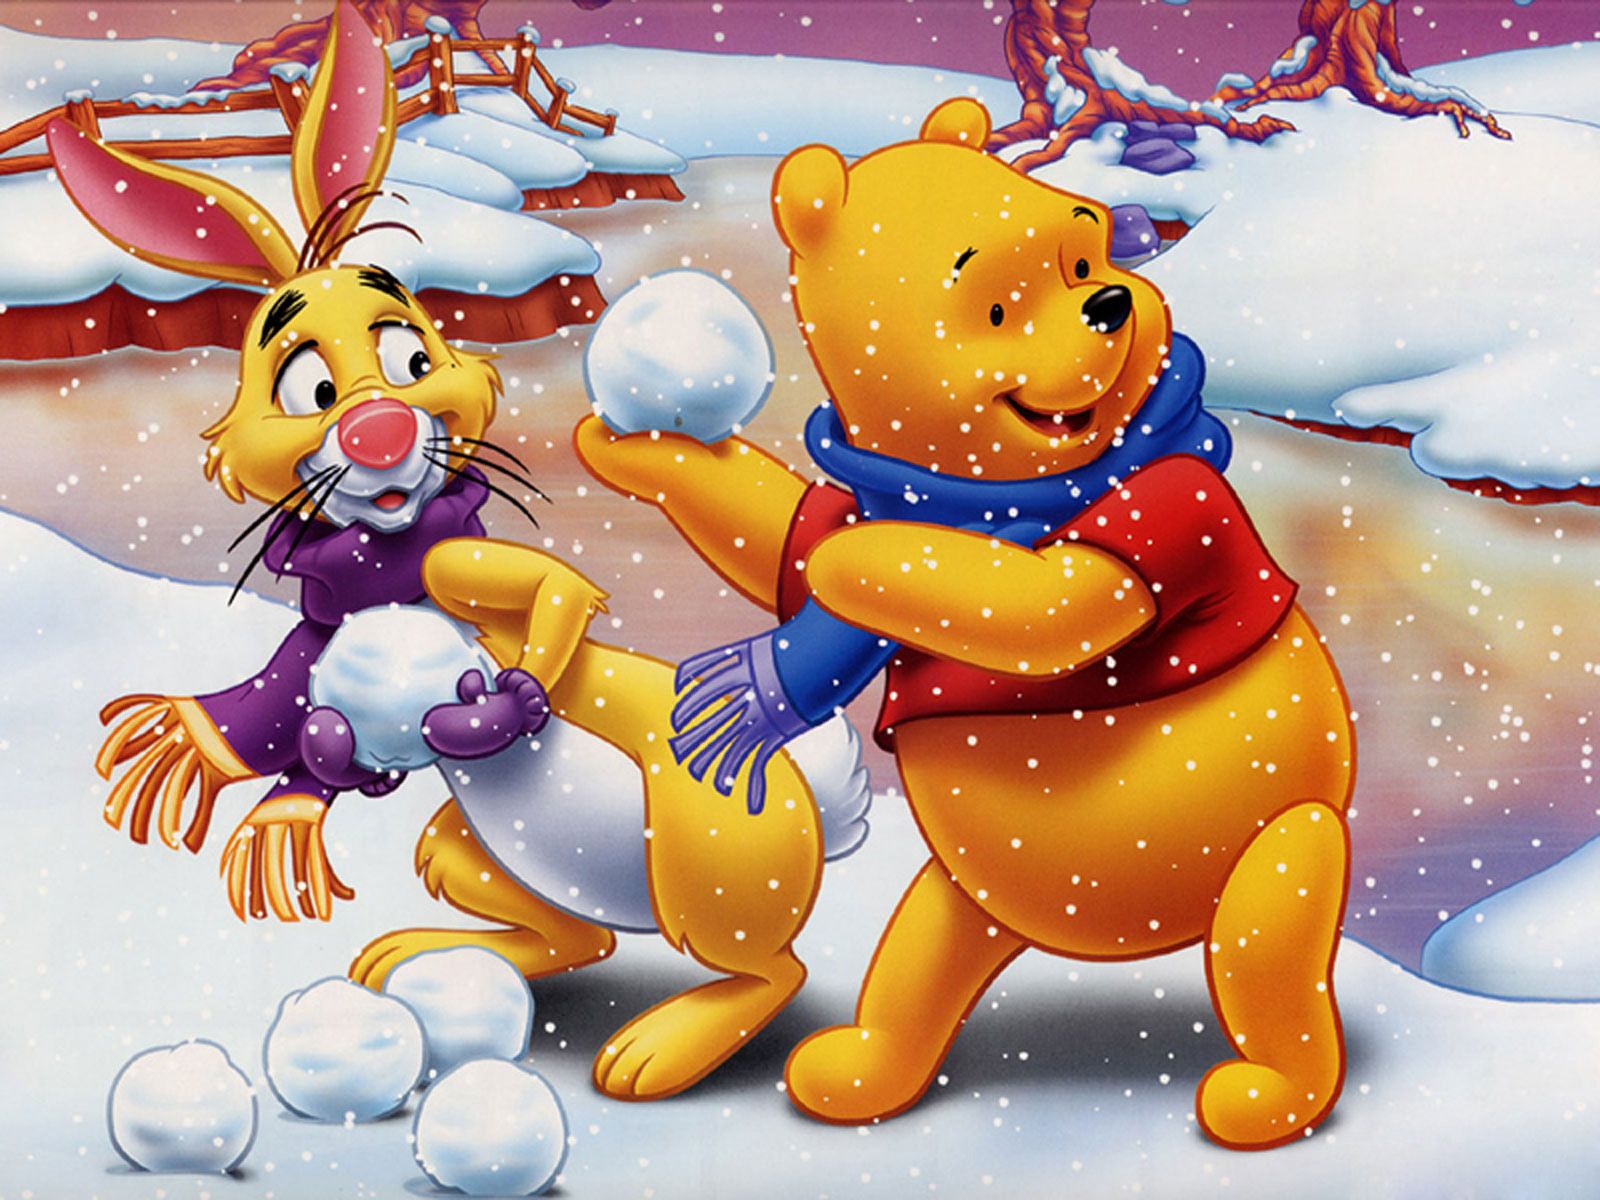 Cartoons Winnie The Pooh Wallpaper - Free high quality background ...